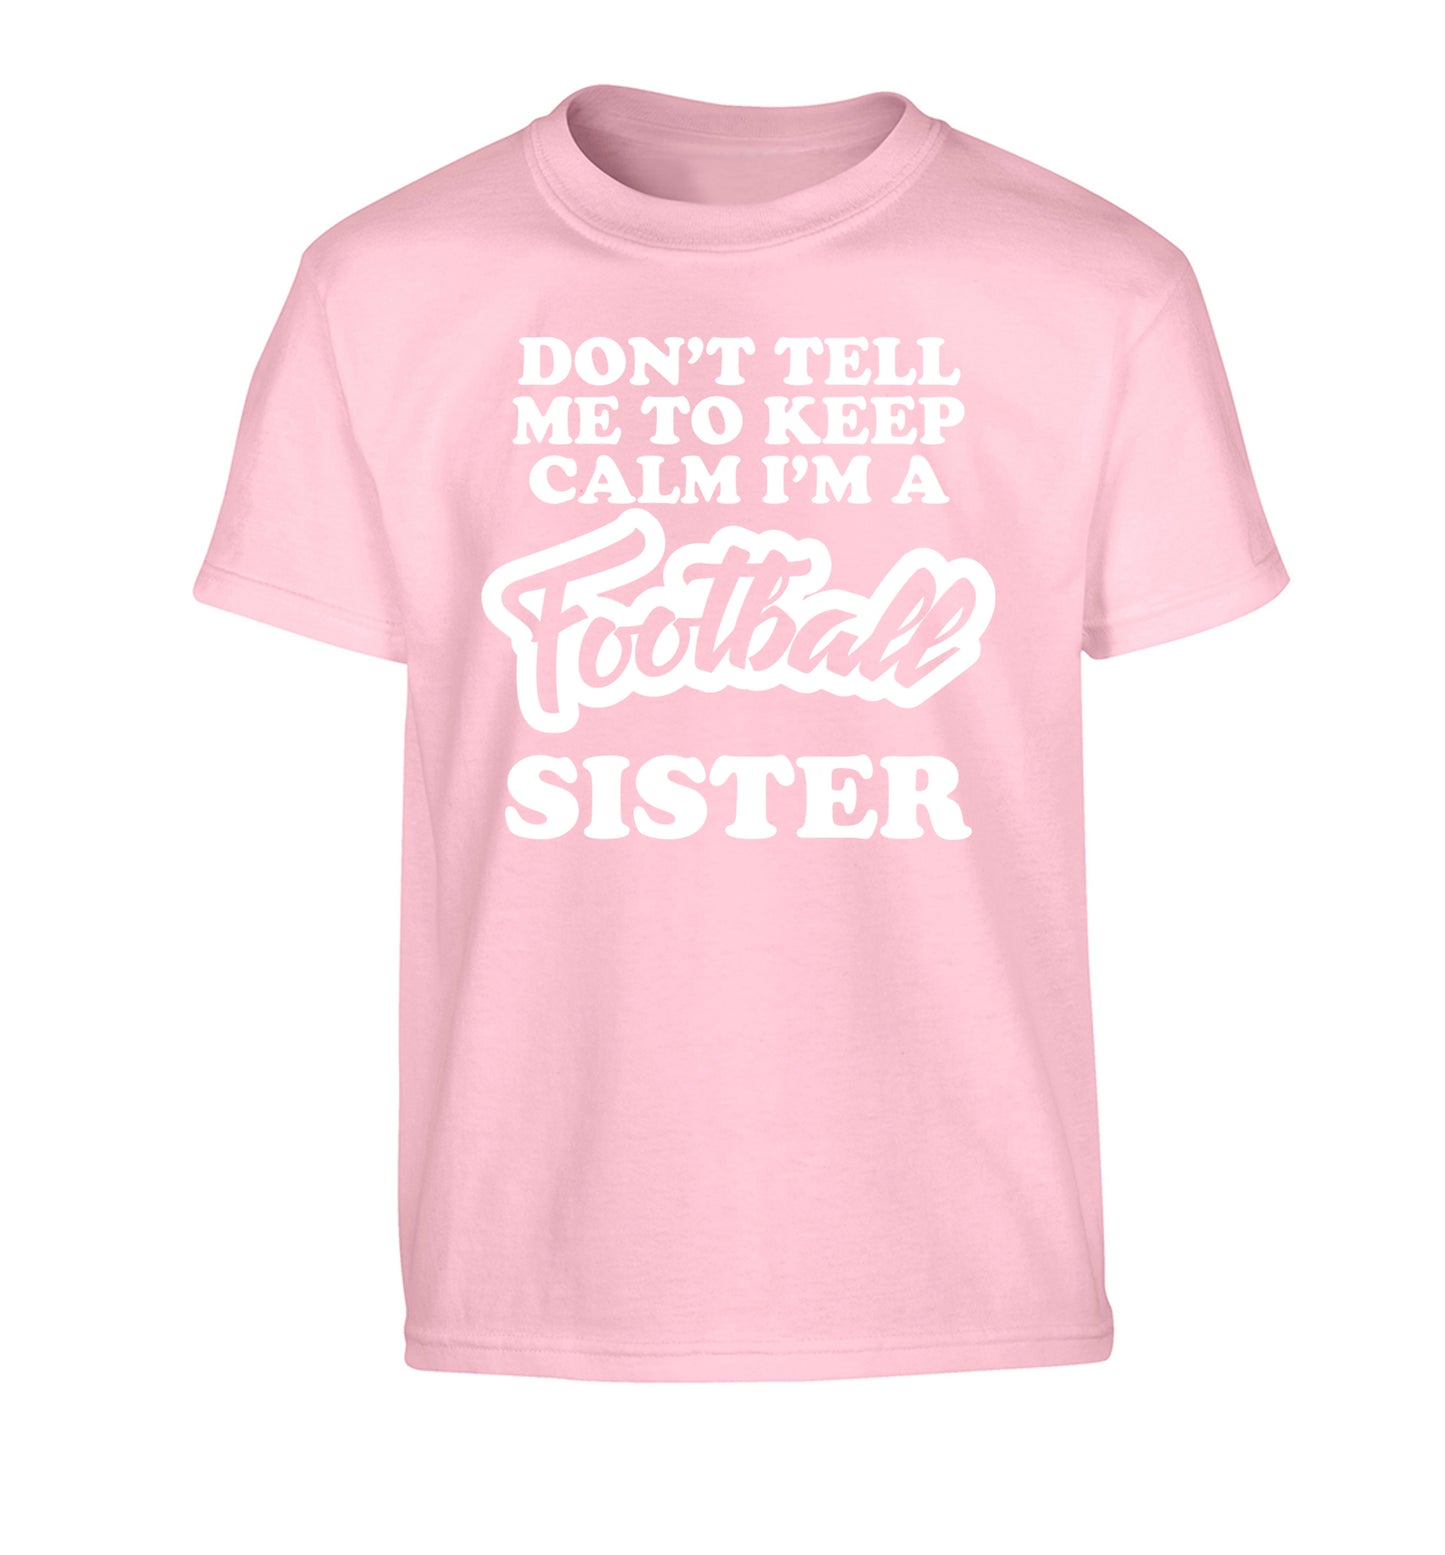 Don't tell me to keep calm I'm a football sister Children's light pink Tshirt 12-14 Years